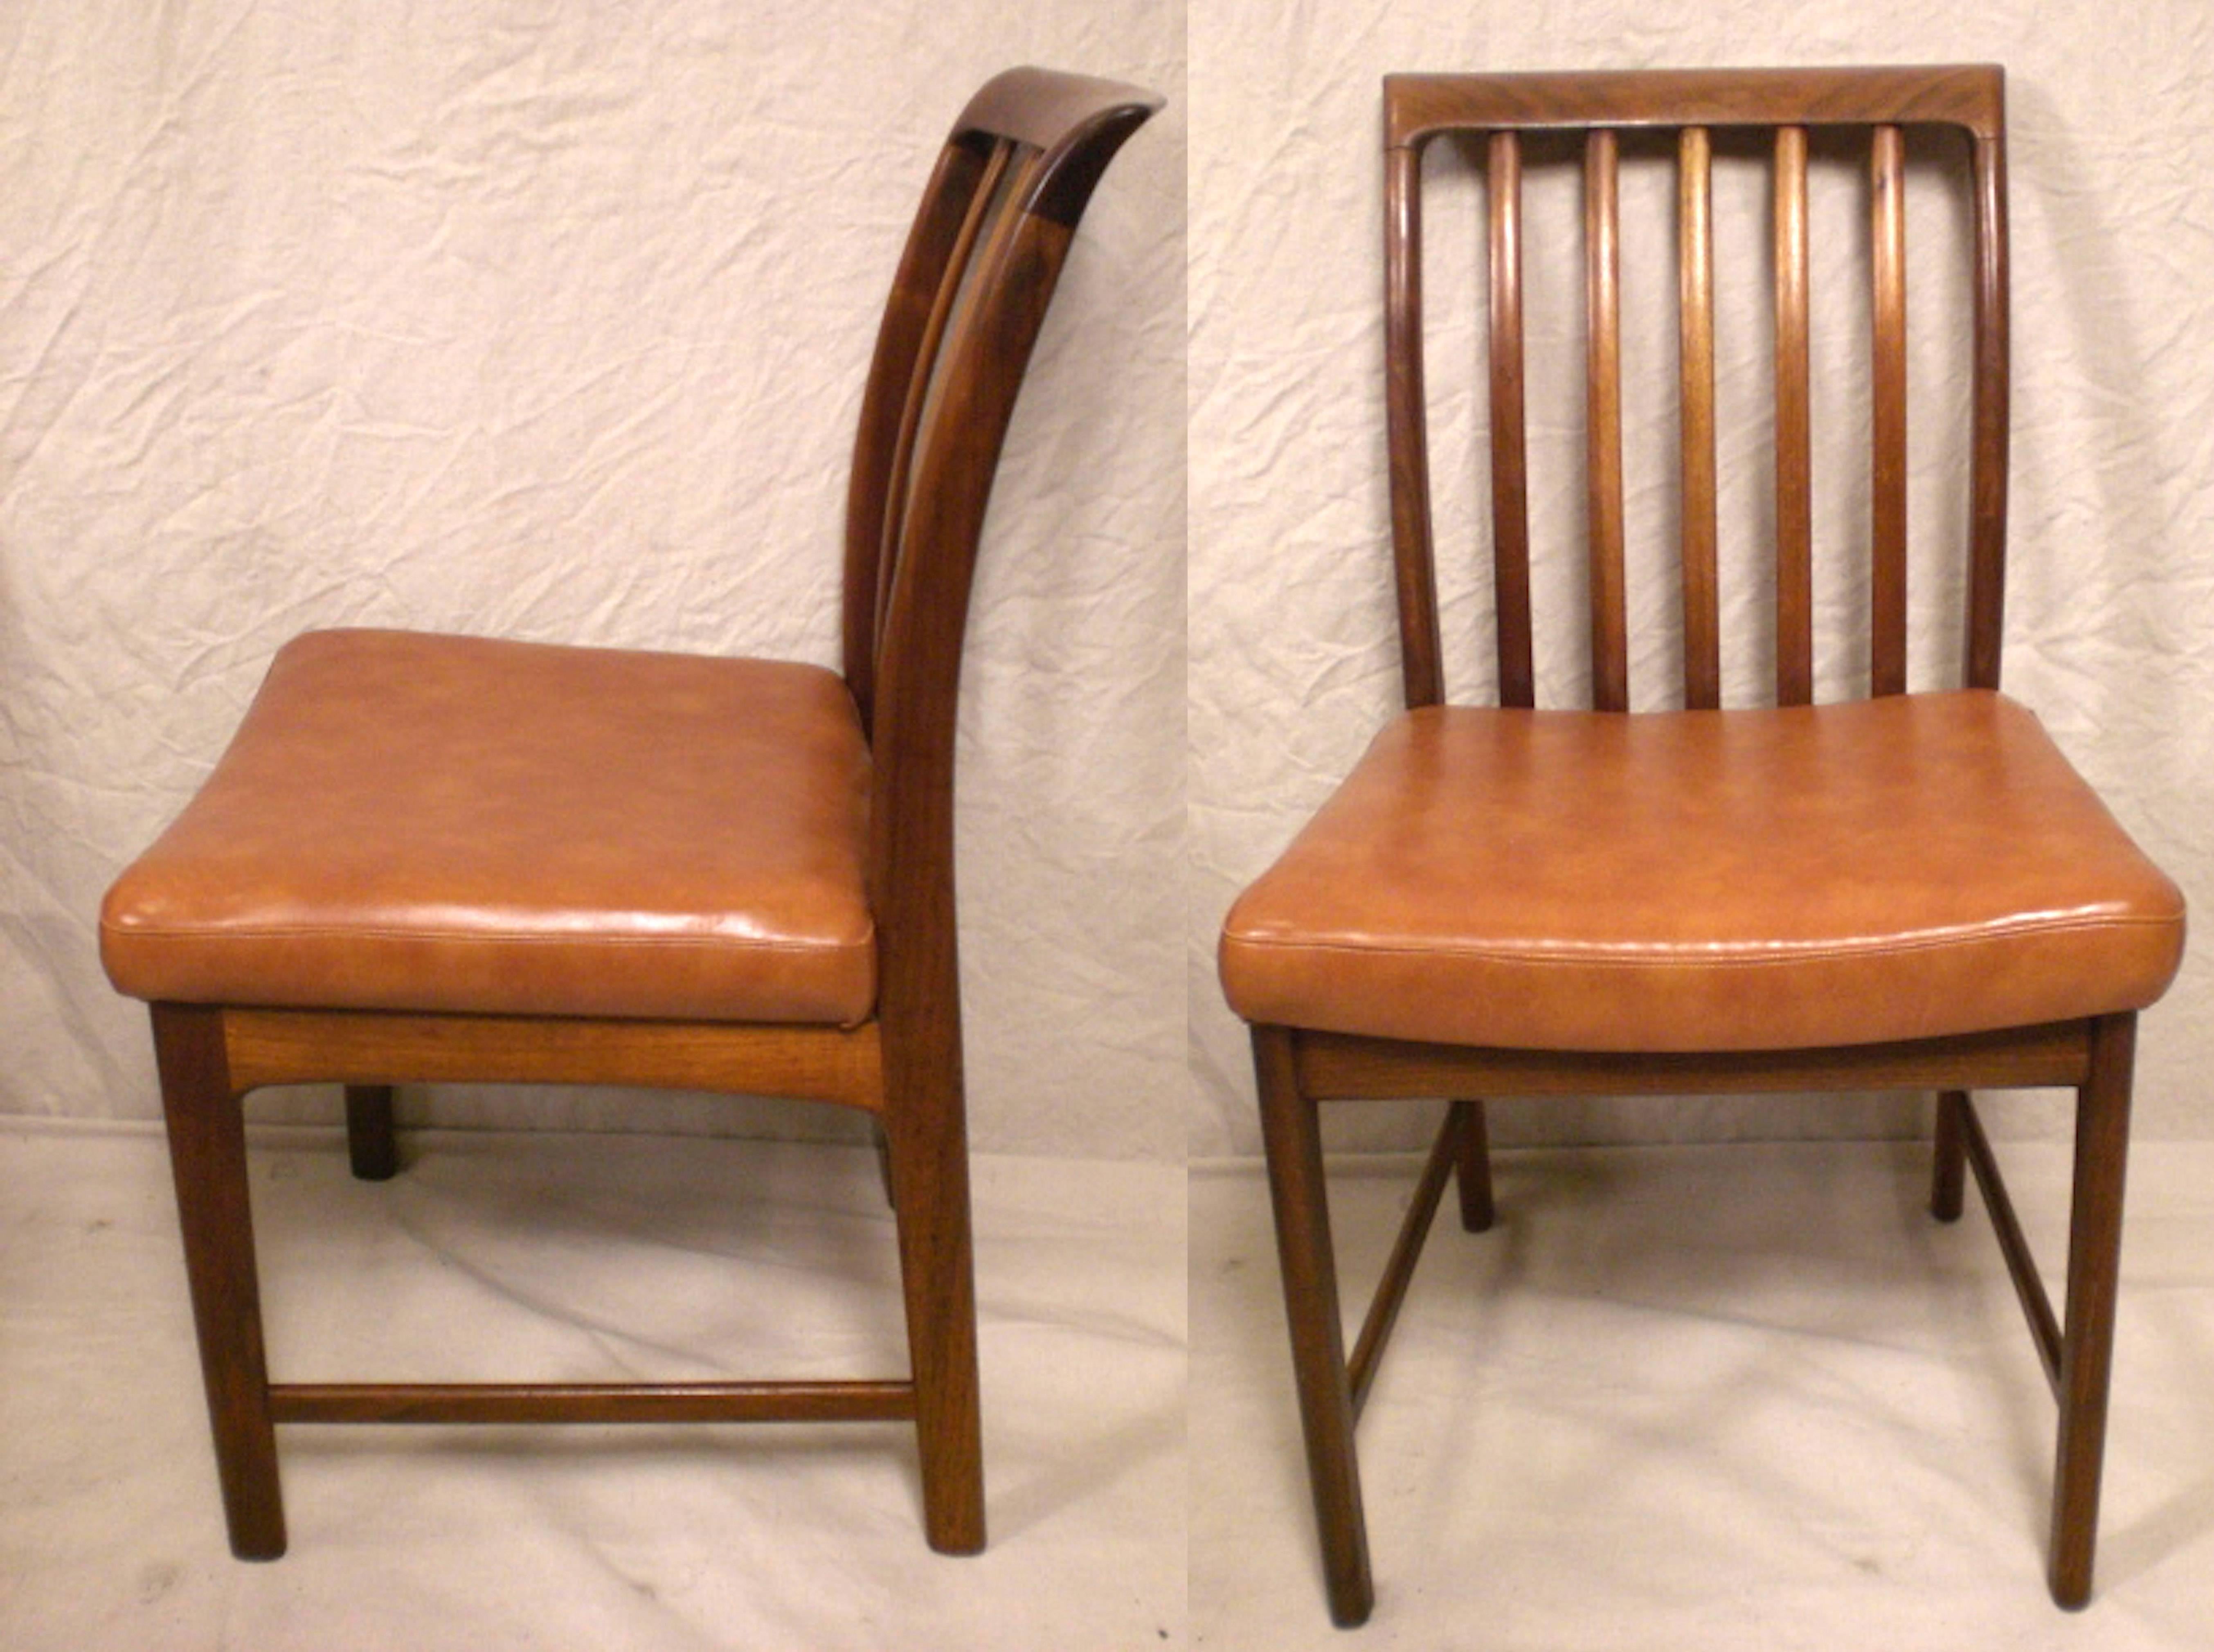 Mid-Century Modern dining chairs by DUX with rosewood frames and orange vinyl seating. Seat backs have a nice curve to them with five slats running up.

(Please confirm item location - NY or NJ - with dealer).
 